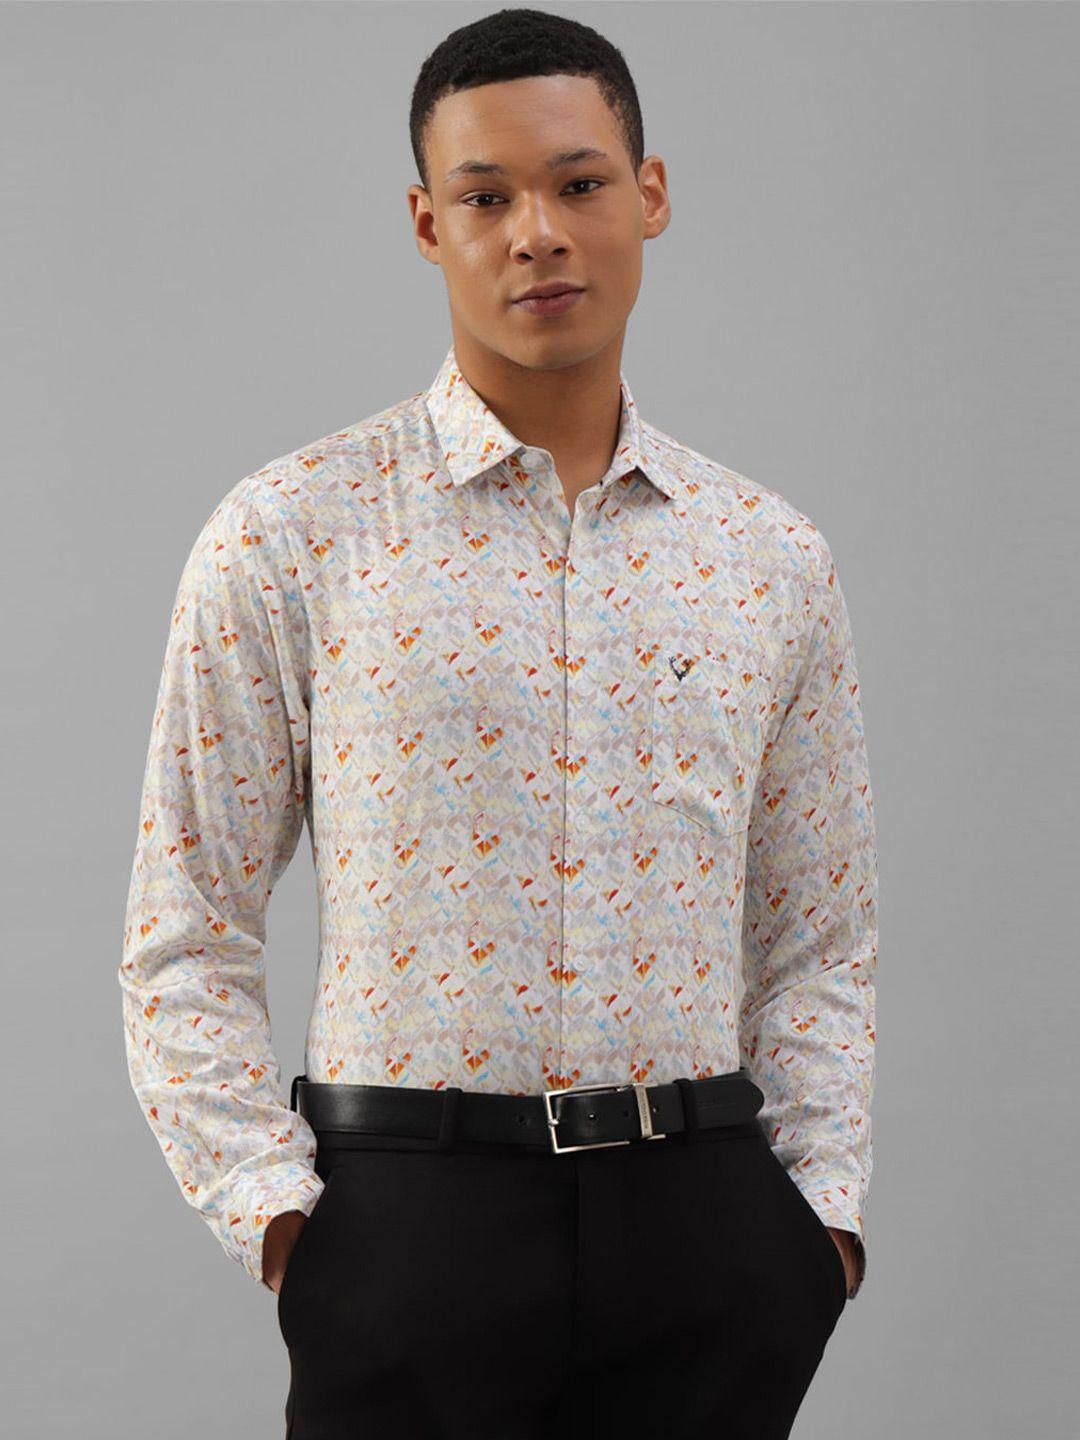 allen solly slim fit geometric printed spread collar pure cotton formal shirt